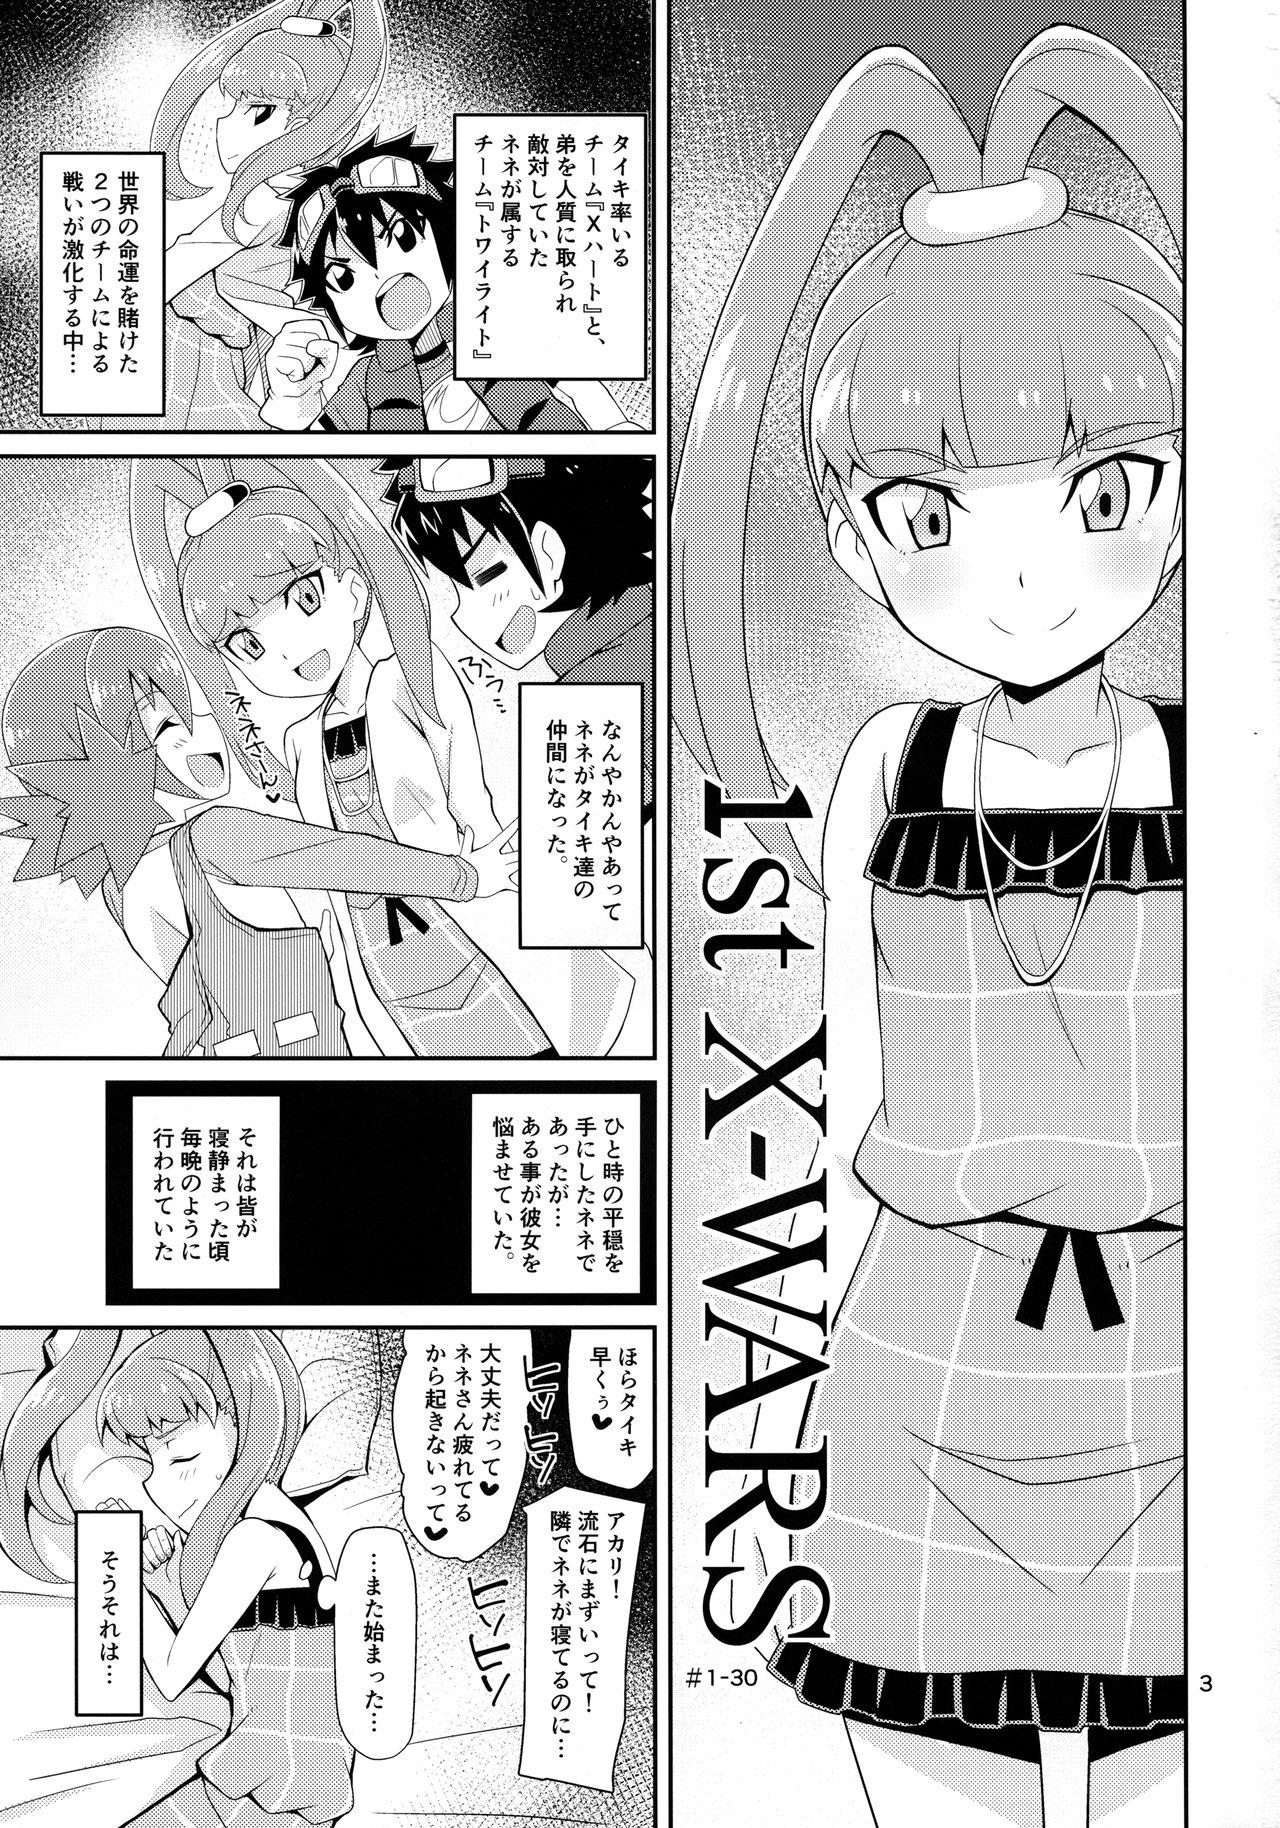 Petite Girl Porn Amanone Chronicle - Digimon xros wars Face - Page 2